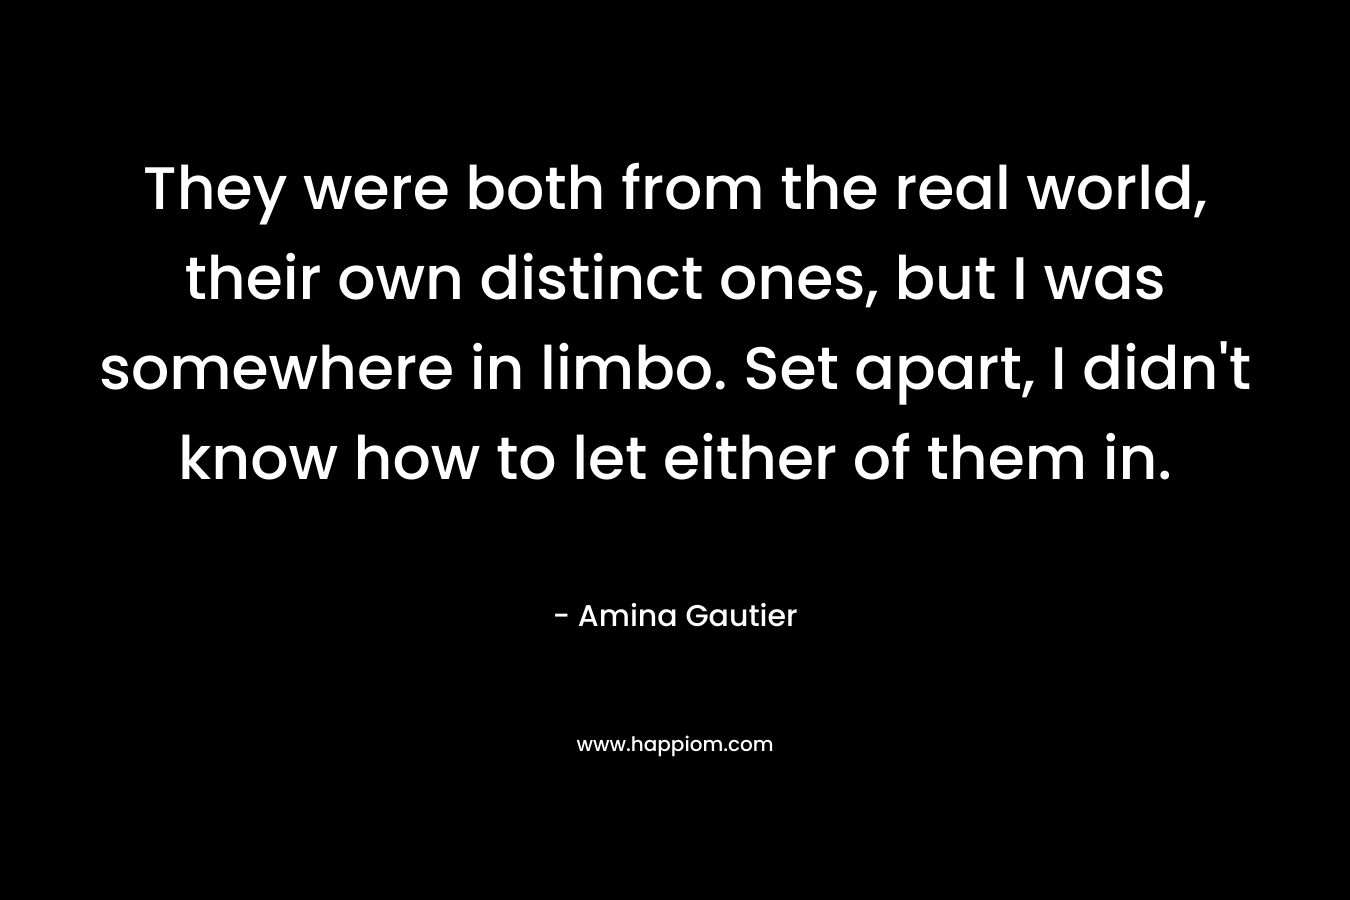 They were both from the real world, their own distinct ones, but I was somewhere in limbo. Set apart, I didn’t know how to let either of them in. – Amina Gautier